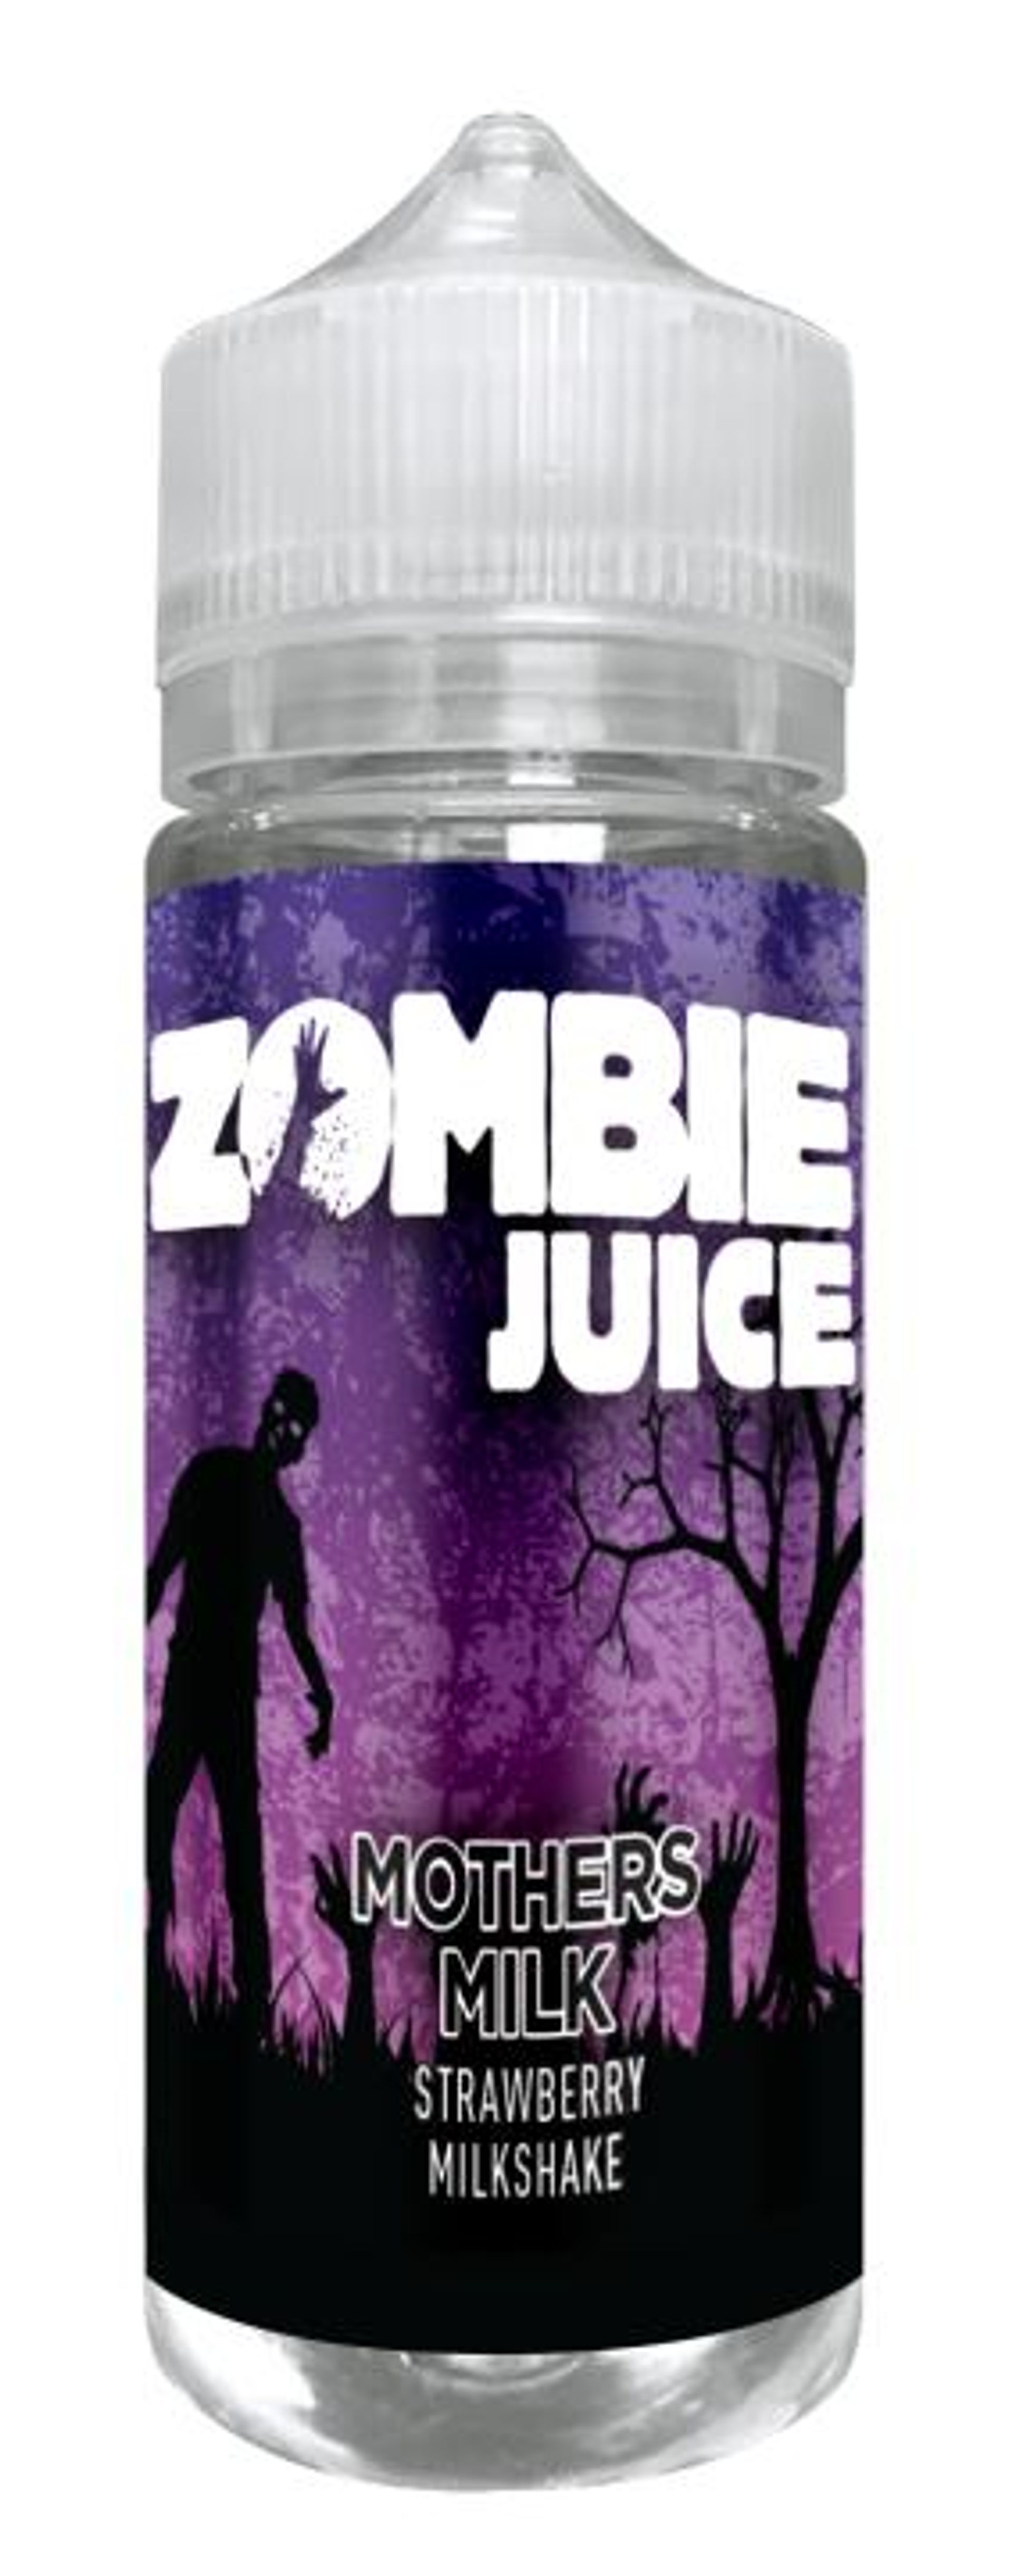 Image of Mother Milk by Zombie Juice